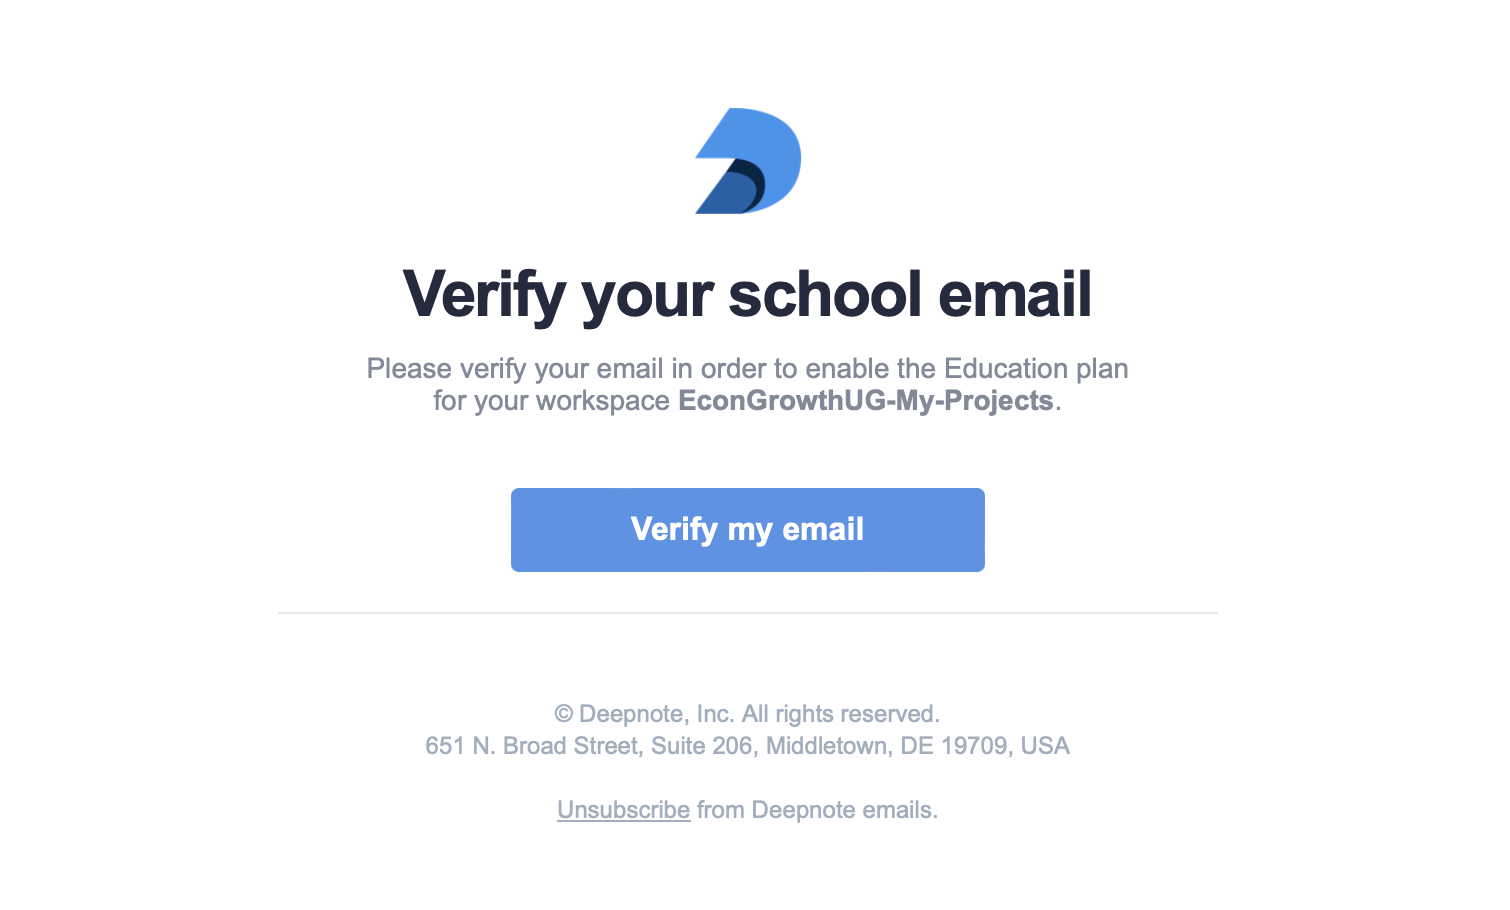 Verification email